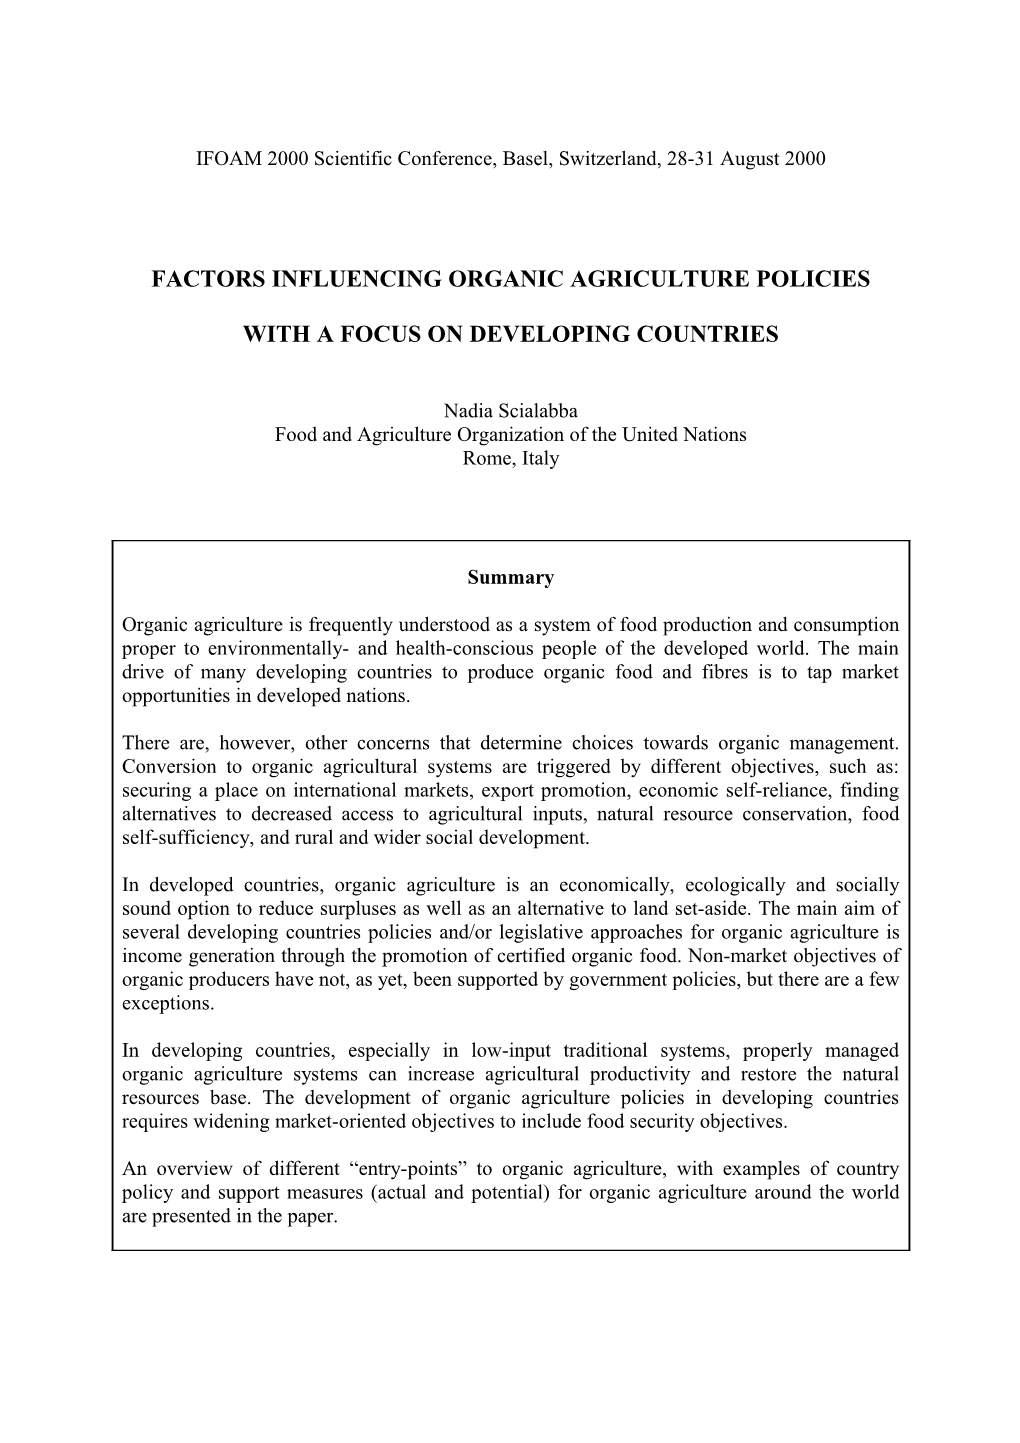 Presentation to the Policy Workshop of the IFOAM 2000 Scientific Conference